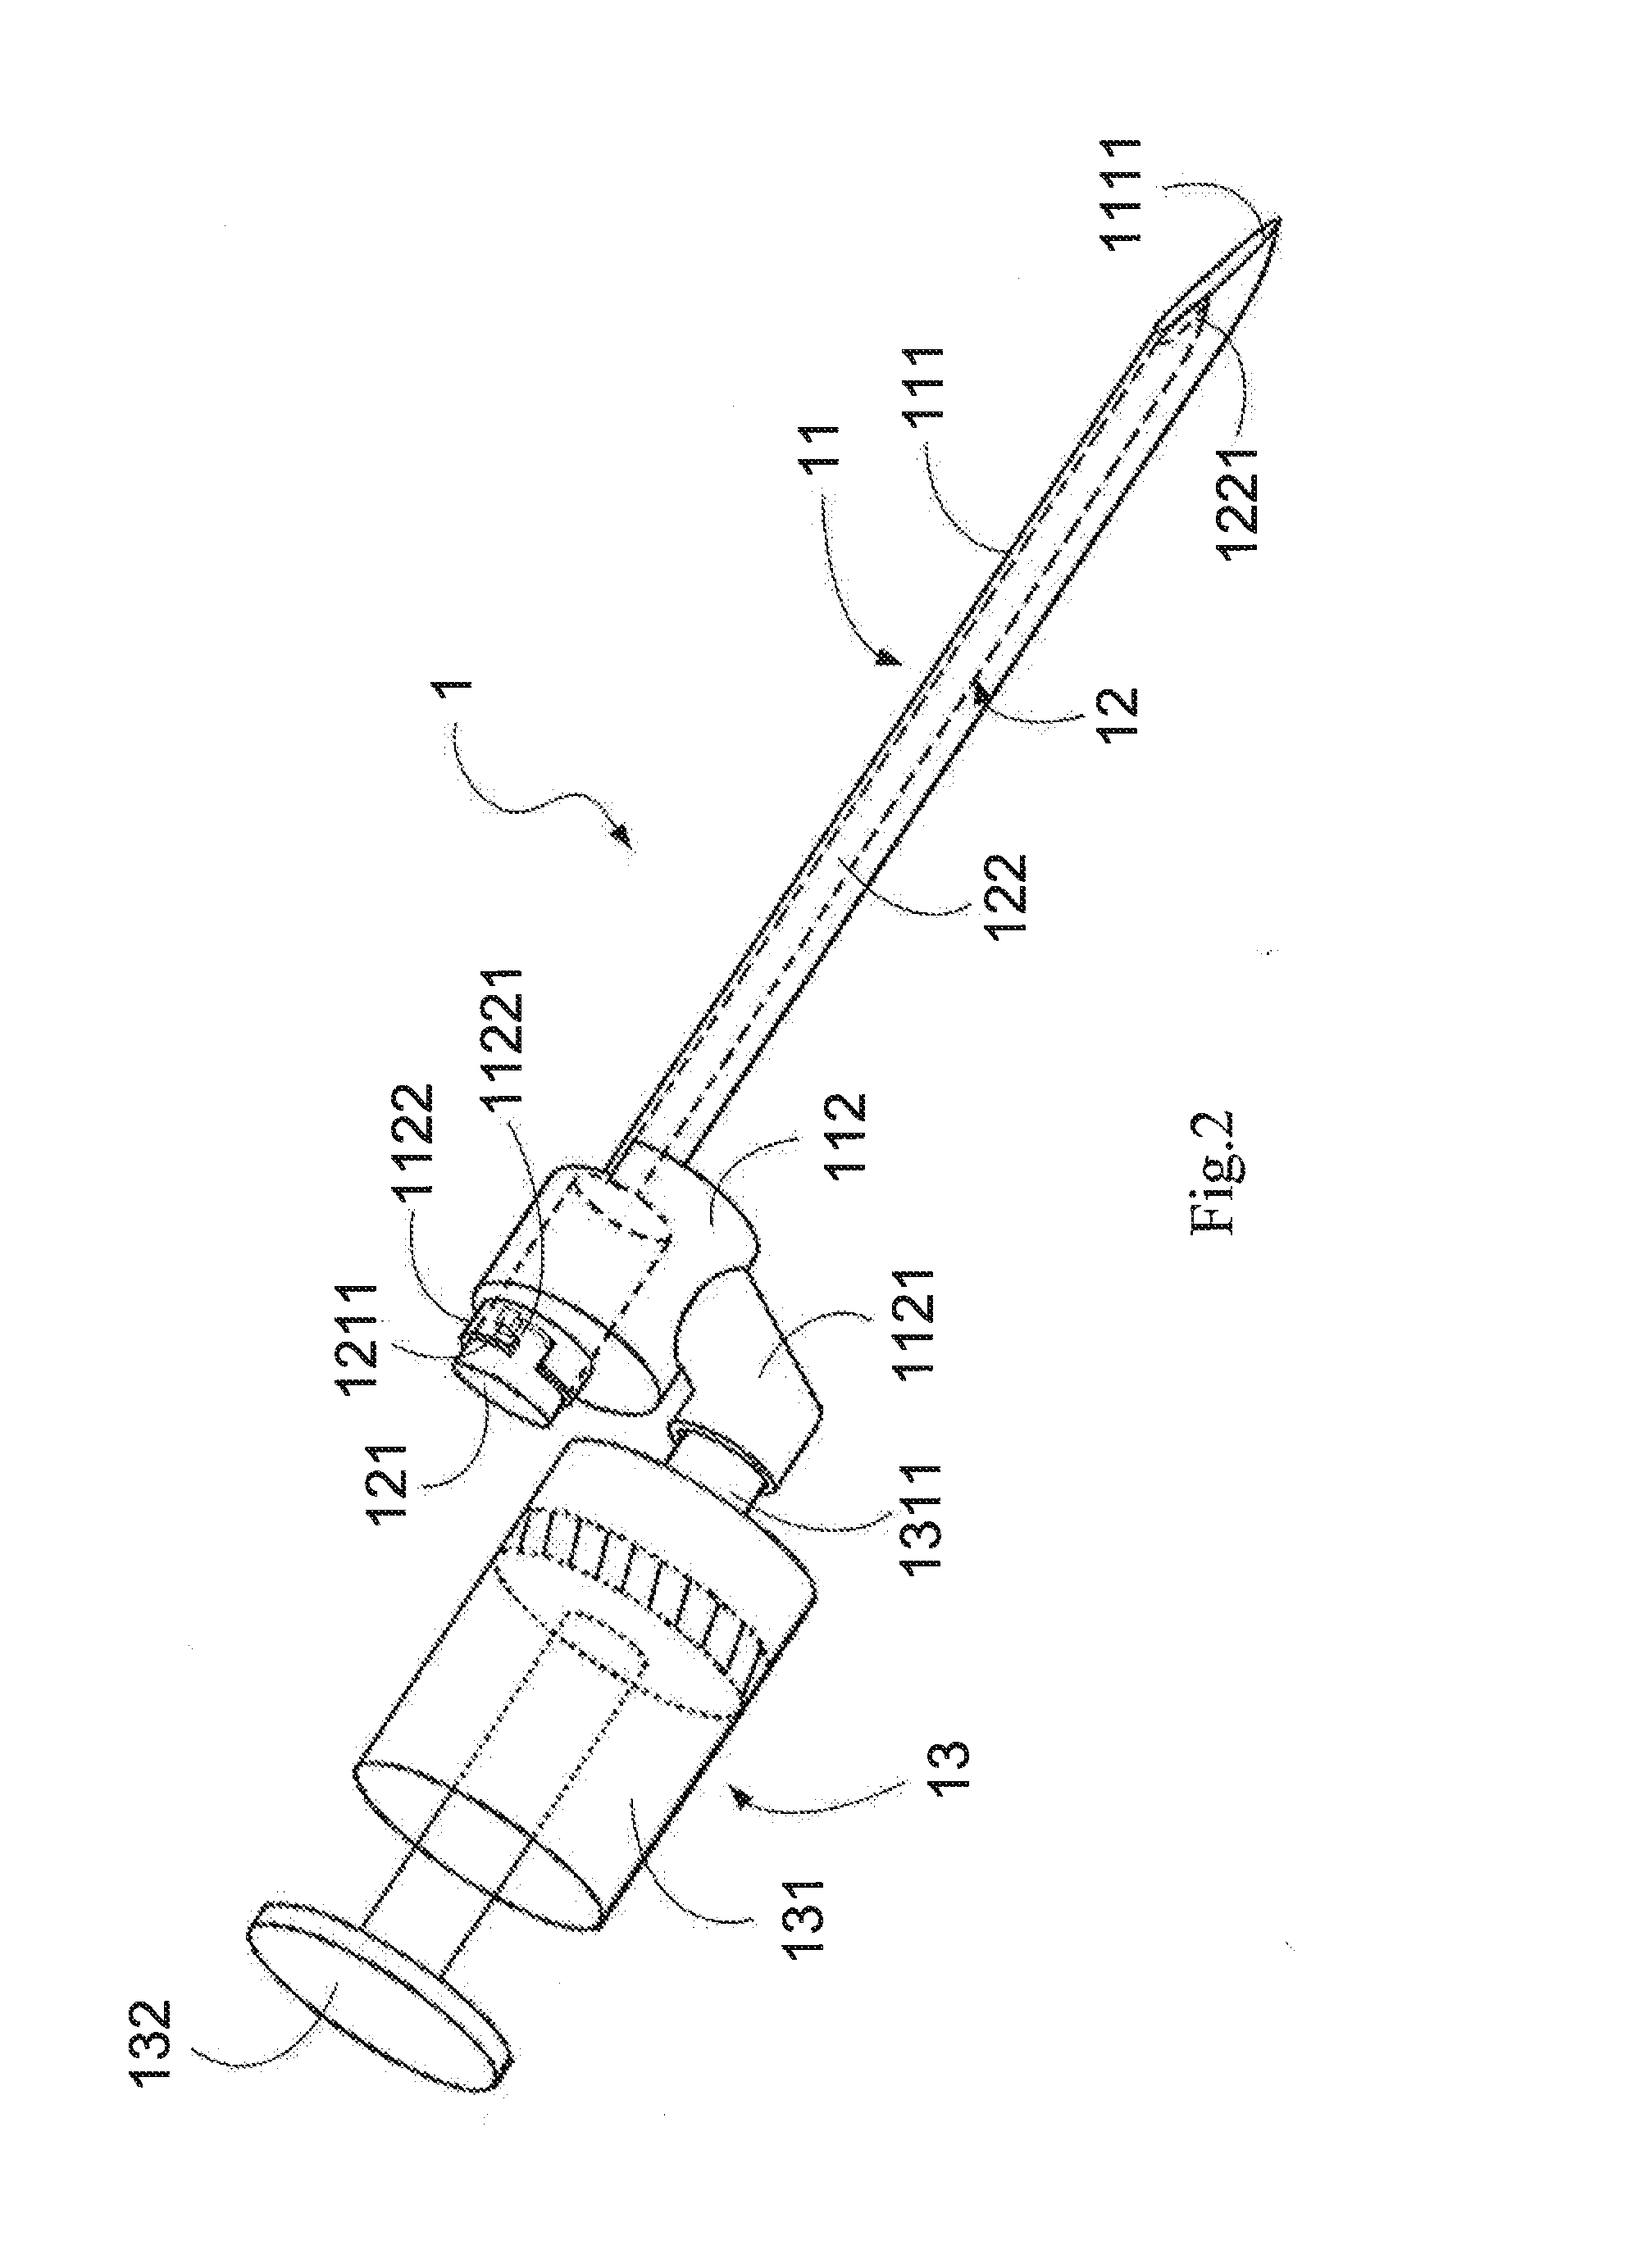 Ultrasonic positioning device for epidural space and method using the same